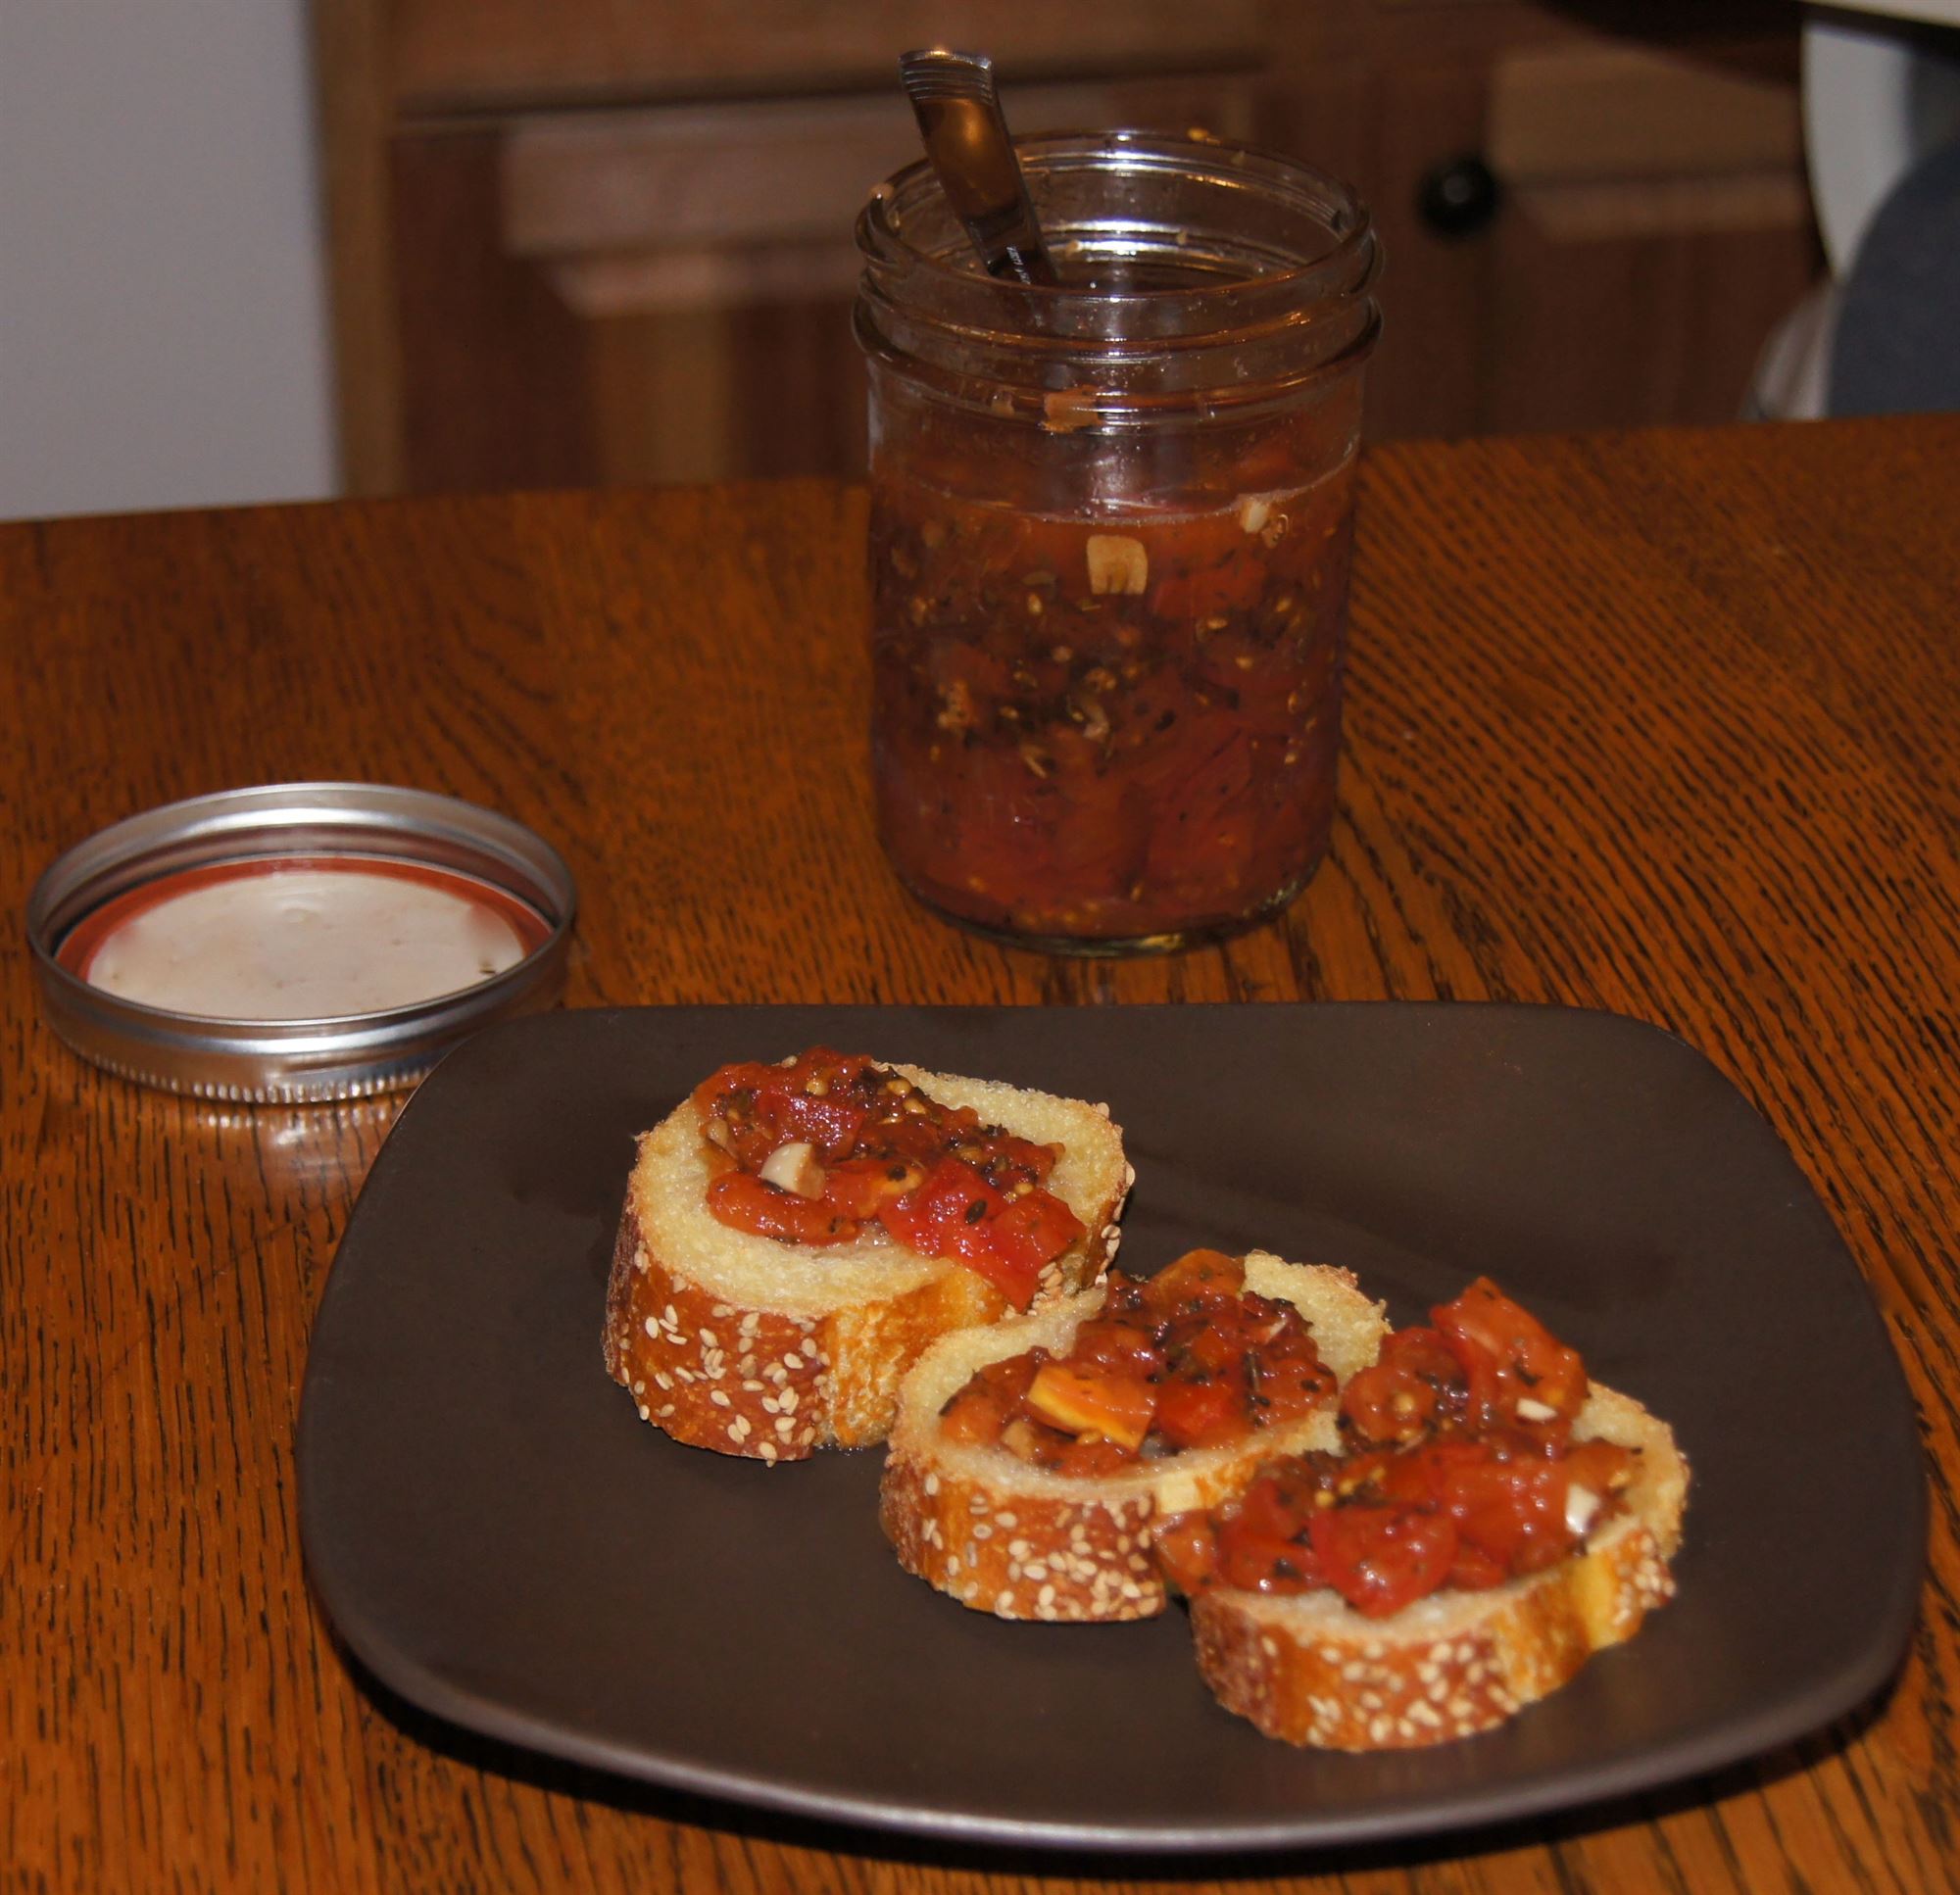 A week later, I opened my first jar and enjoyed some fresh bruschetta.